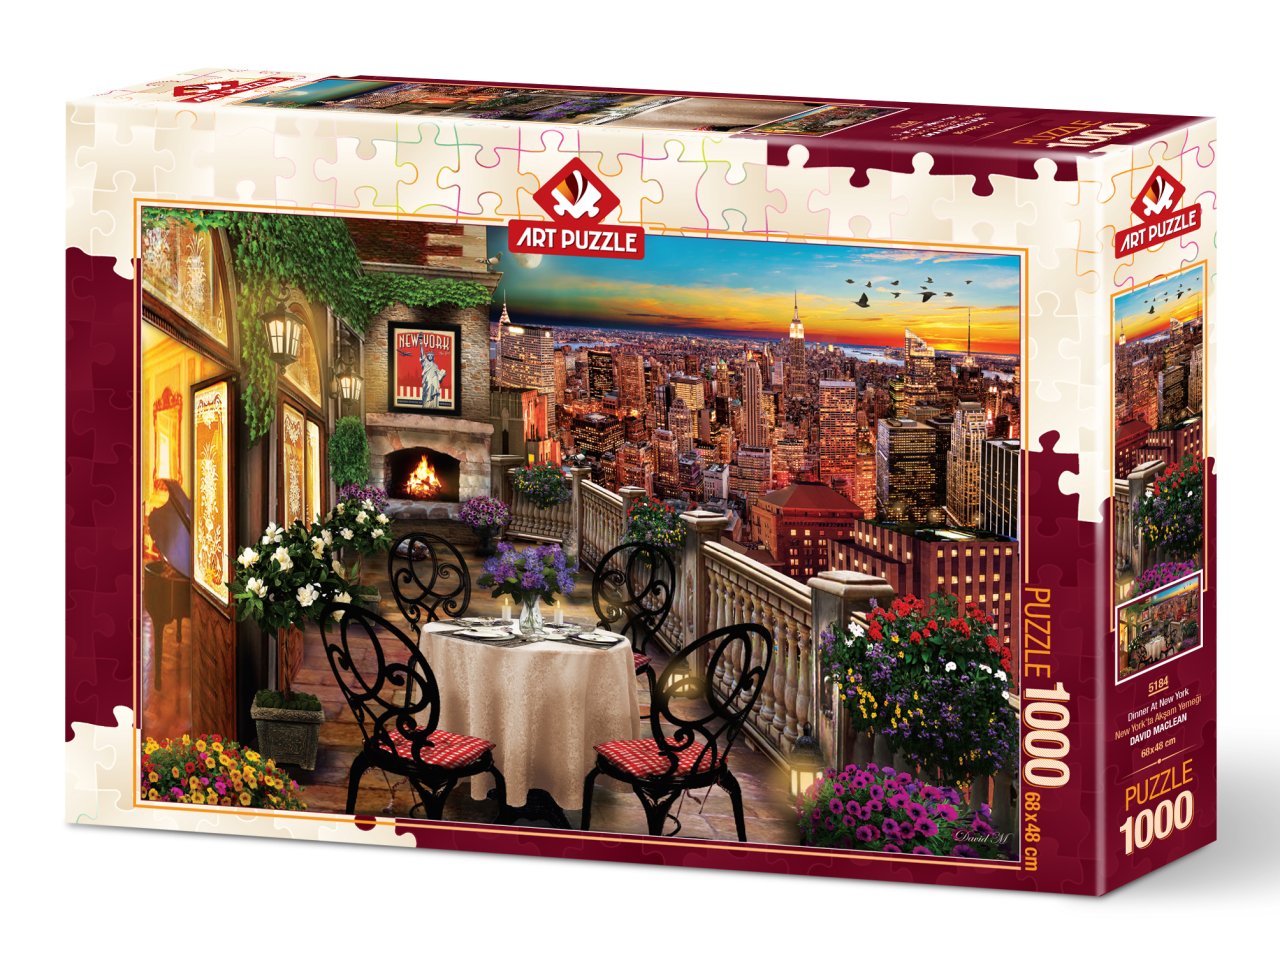 Art Puzzle - Dinner in New York - 1000 piece jigsaw puzzle